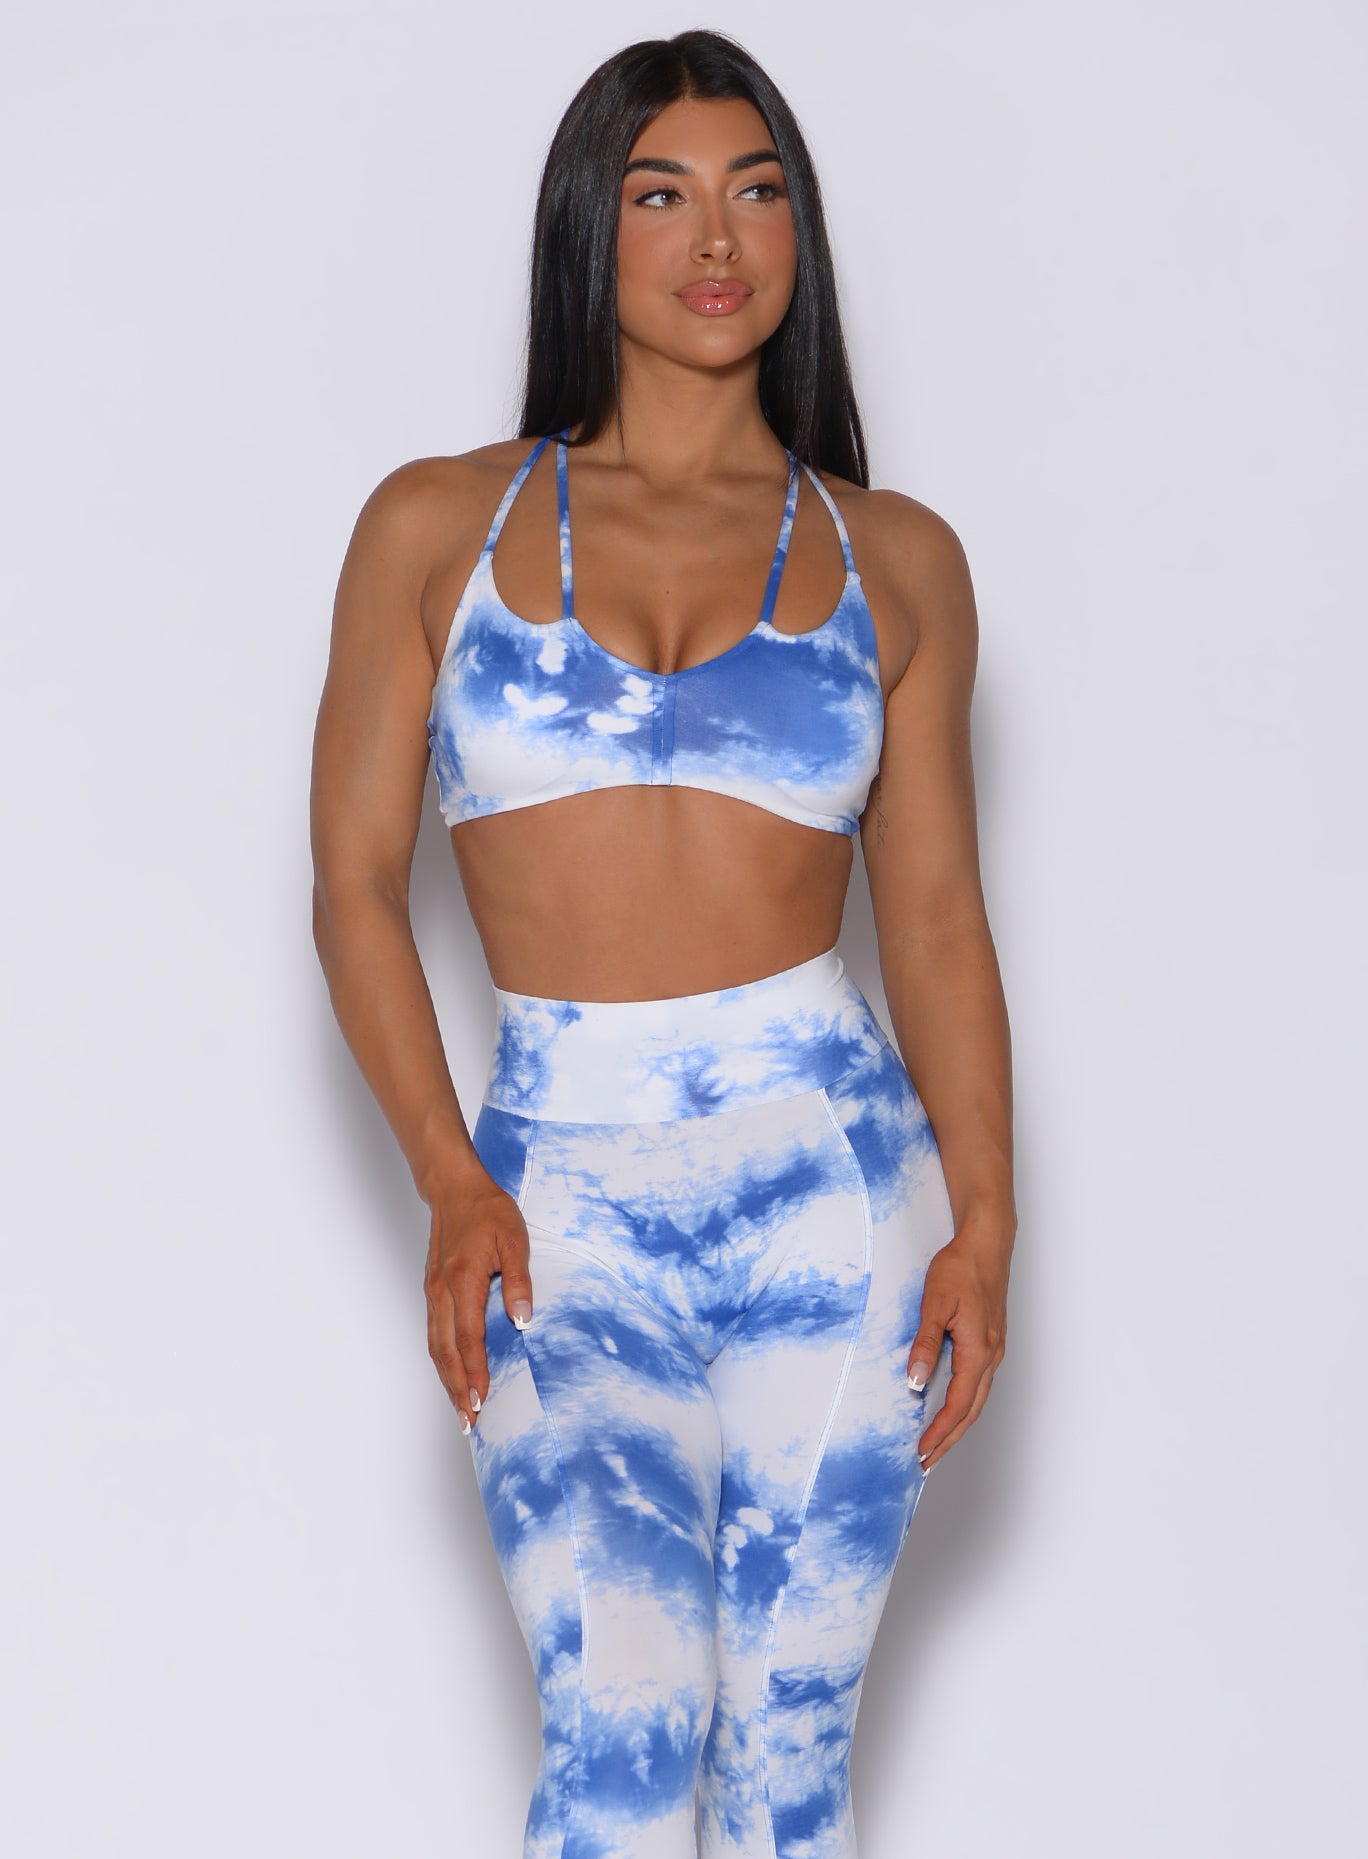 Picture of a model facing forward wearing our tie dye topnotch bra in white blue along with a matching leggings 